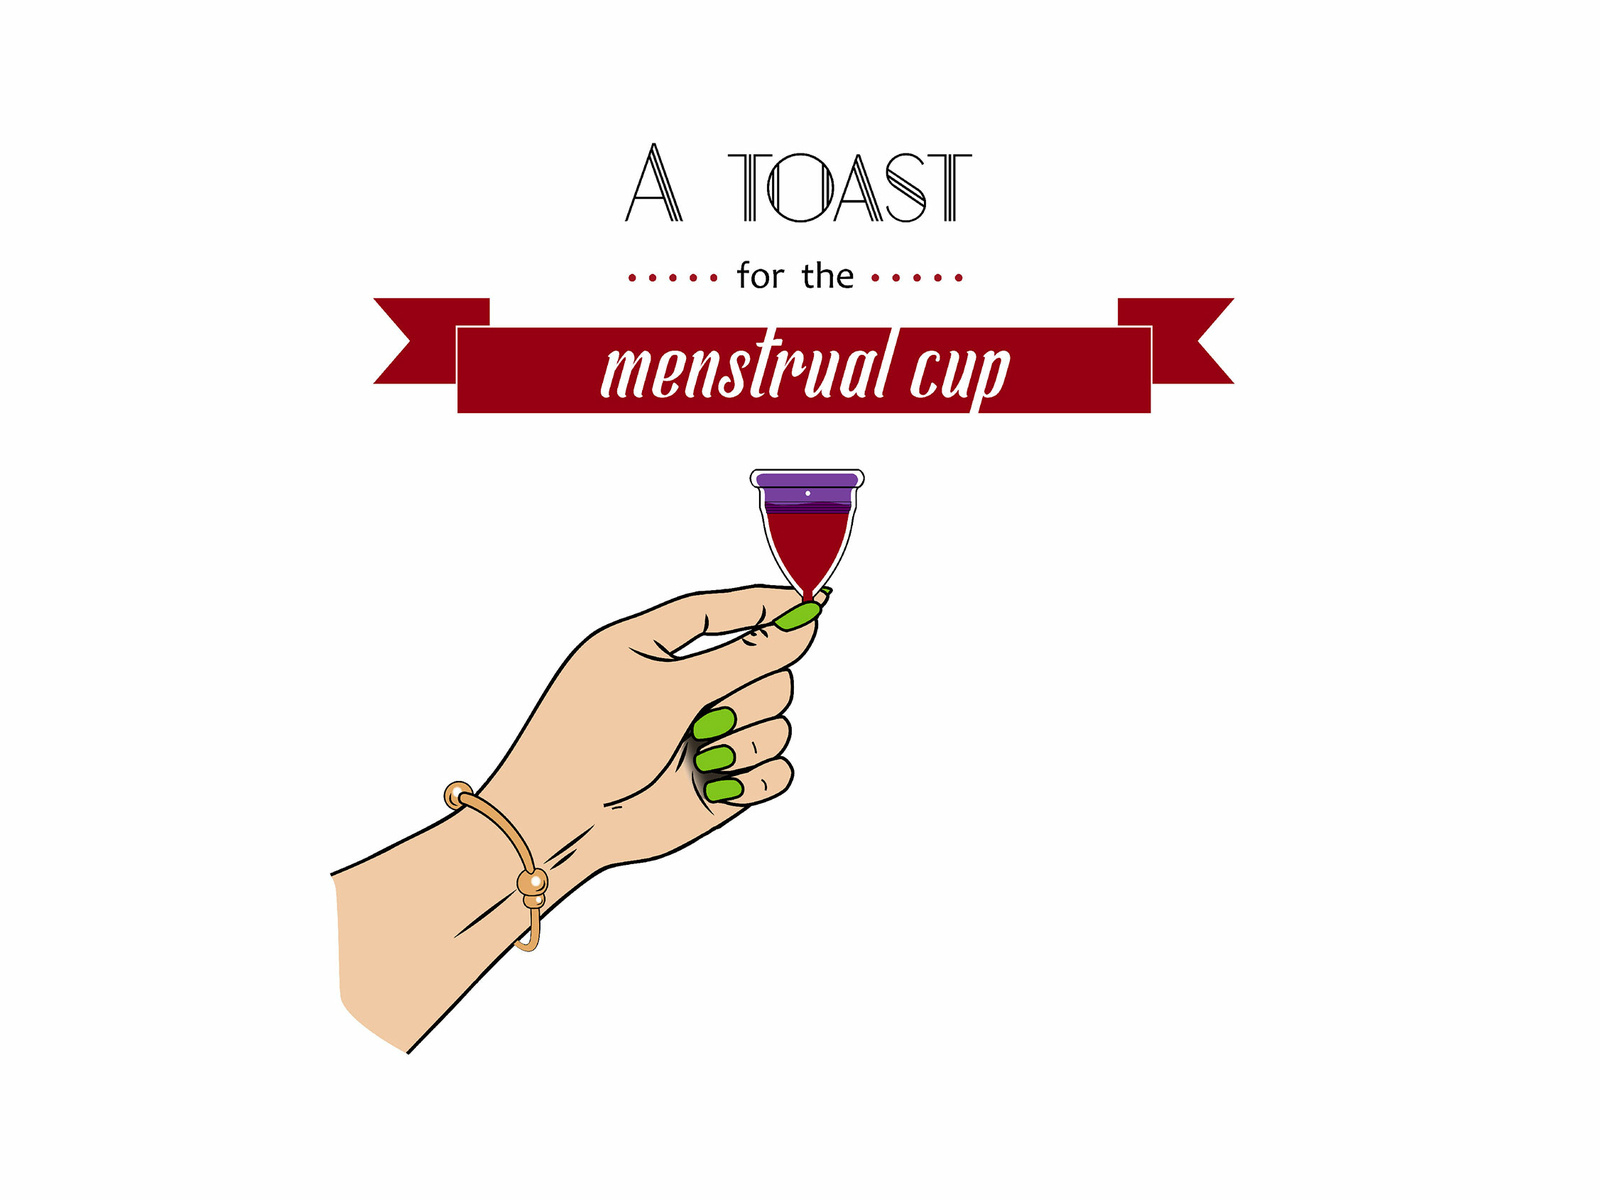 Menstrual Cup Diagram A Toast For The Menstrual Cup Celeste Karpman Canseco On Dribbble